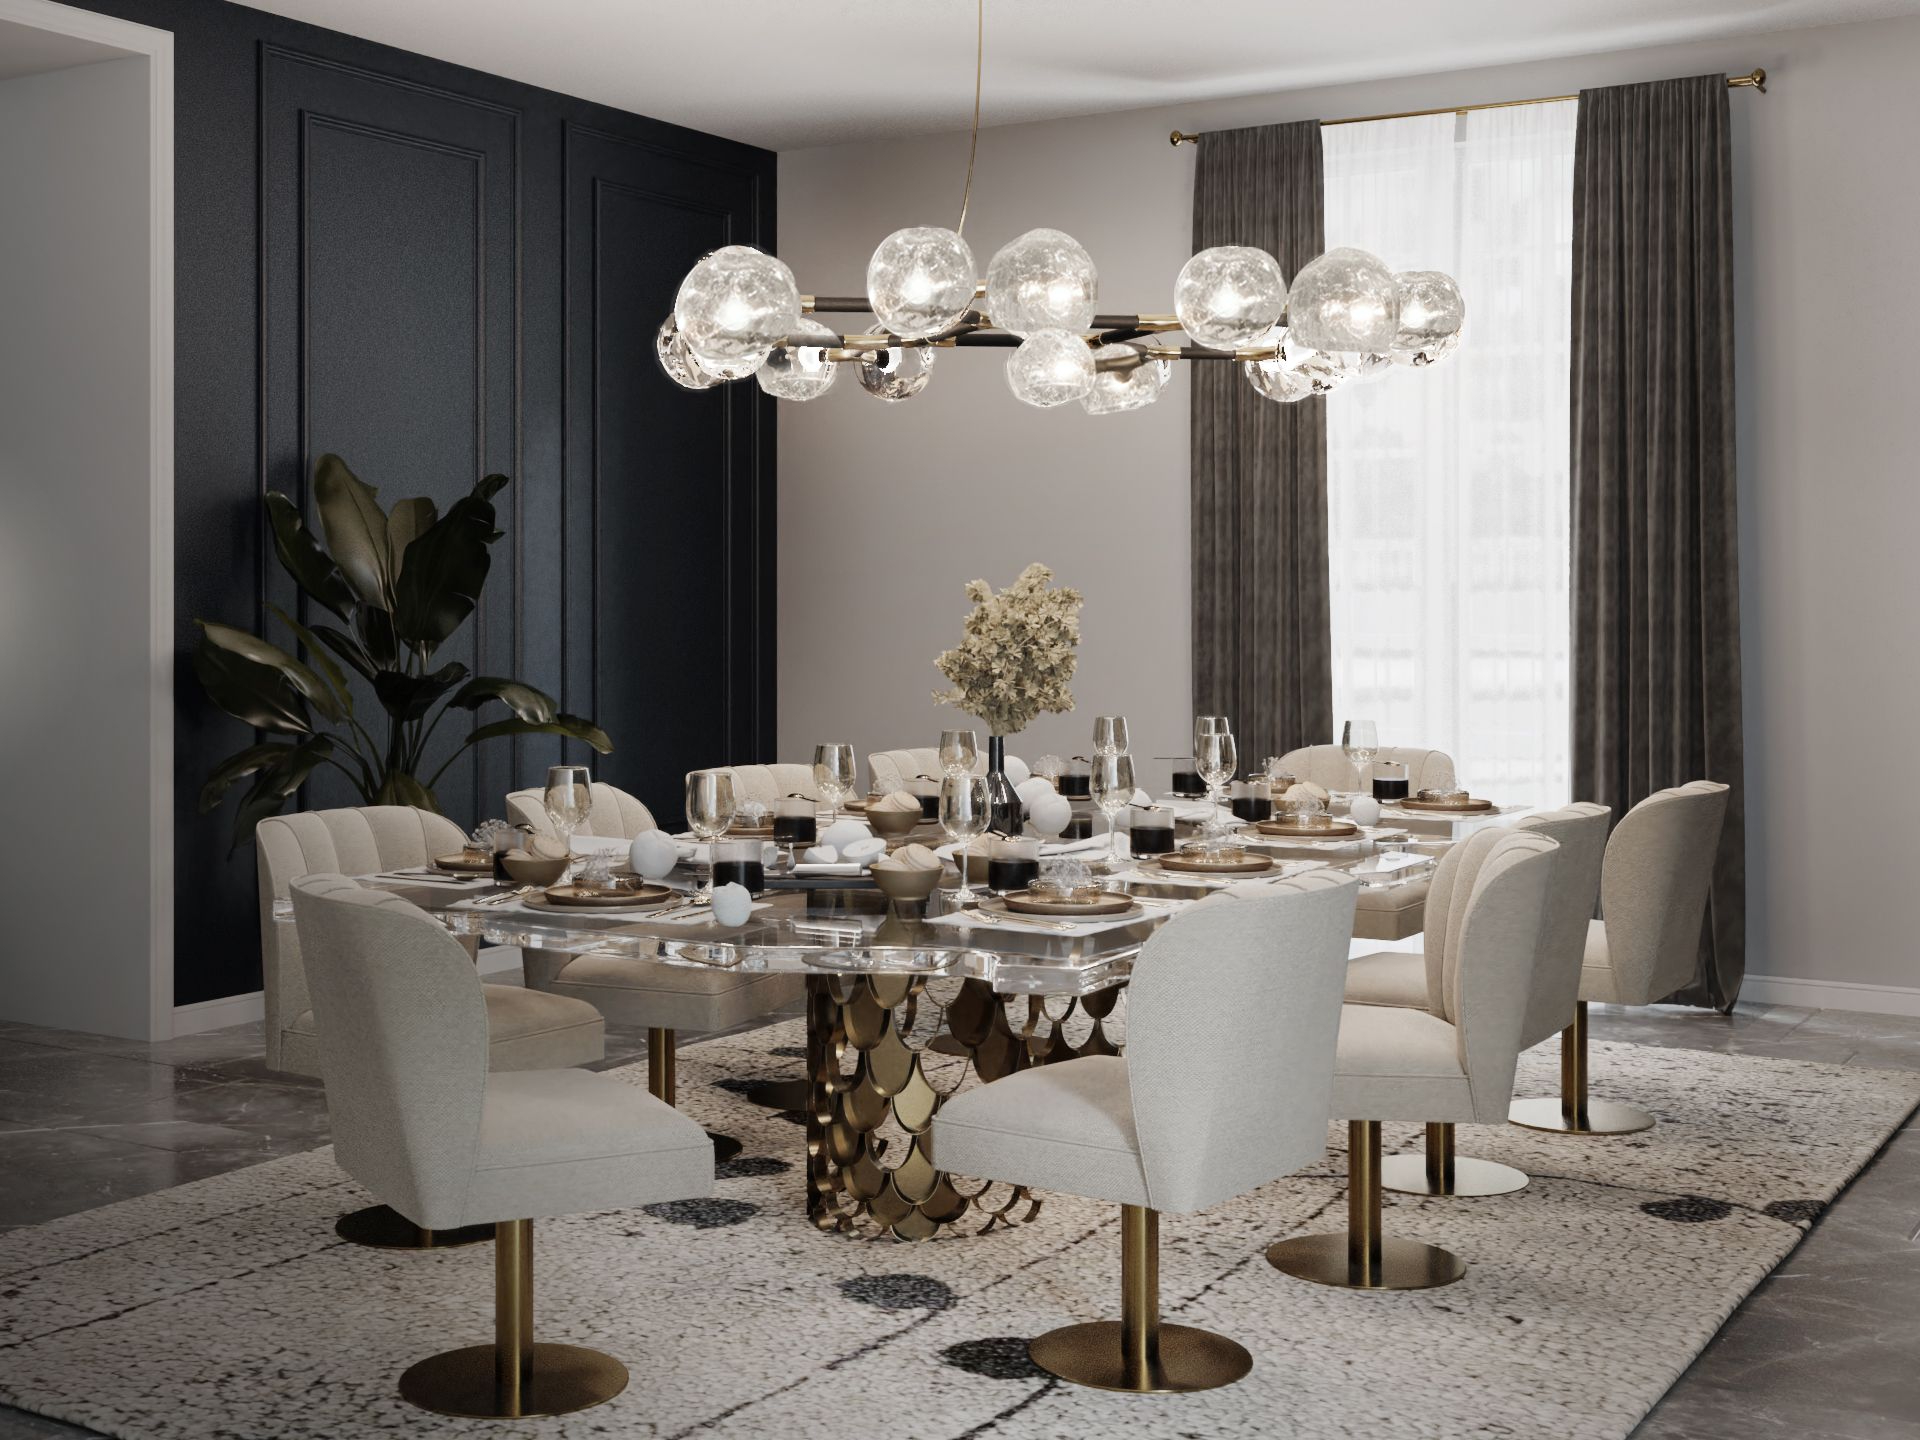 Modern Dining Room That Creates A Favorable Ambiance - Home'Society